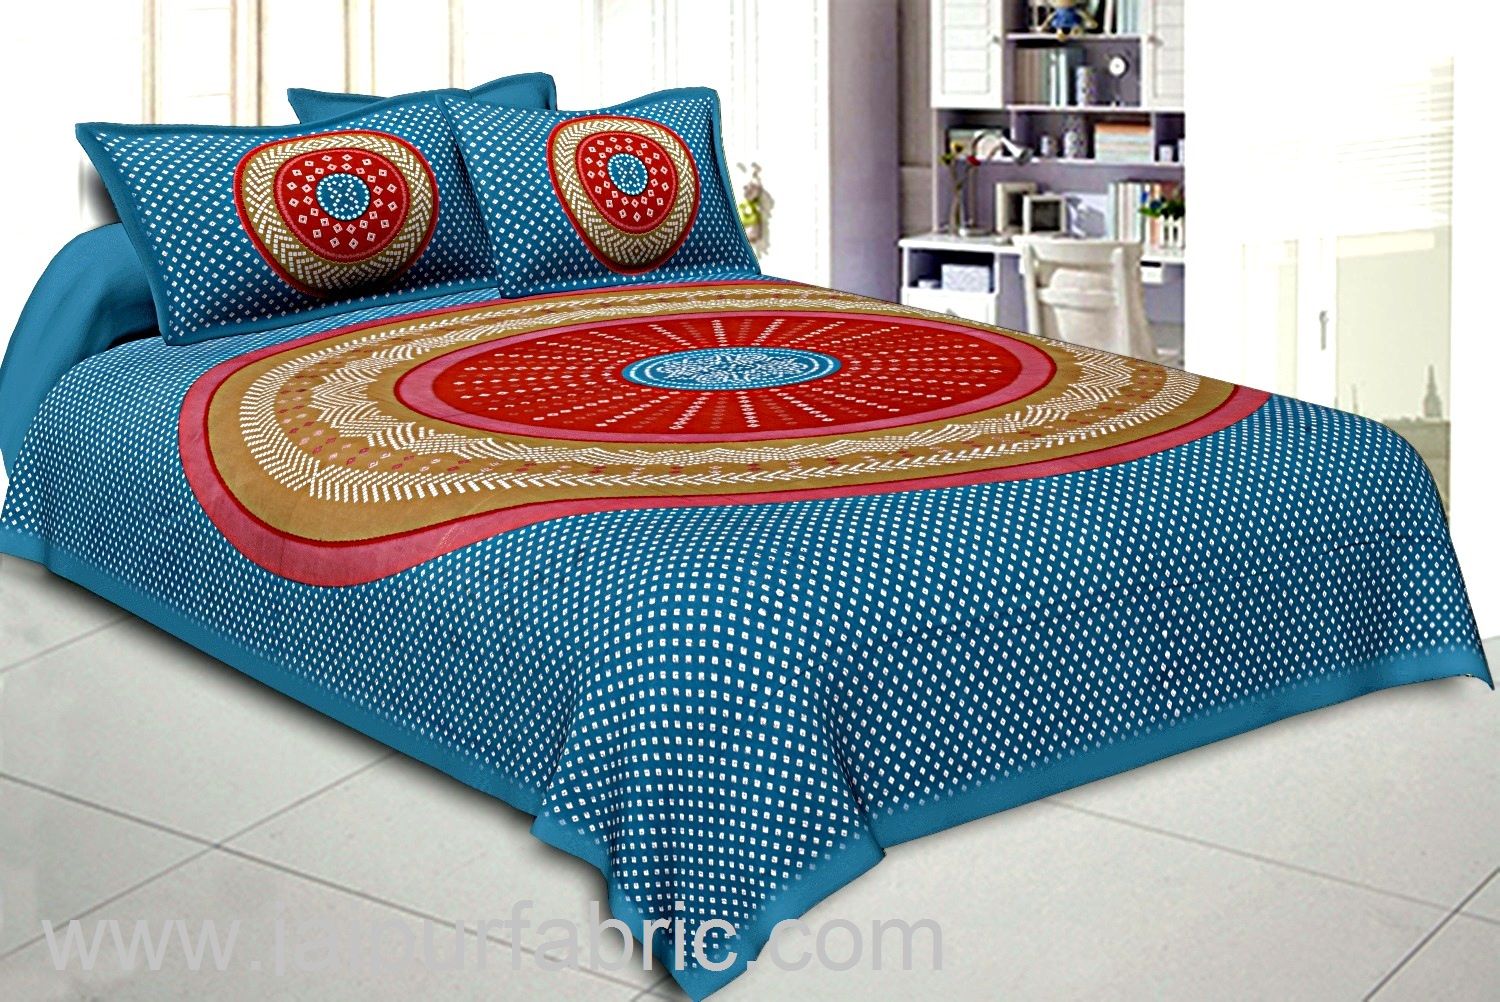 COMBO120 Beautiful Multi color 4 Bedsheets + 8 Pillow Covers